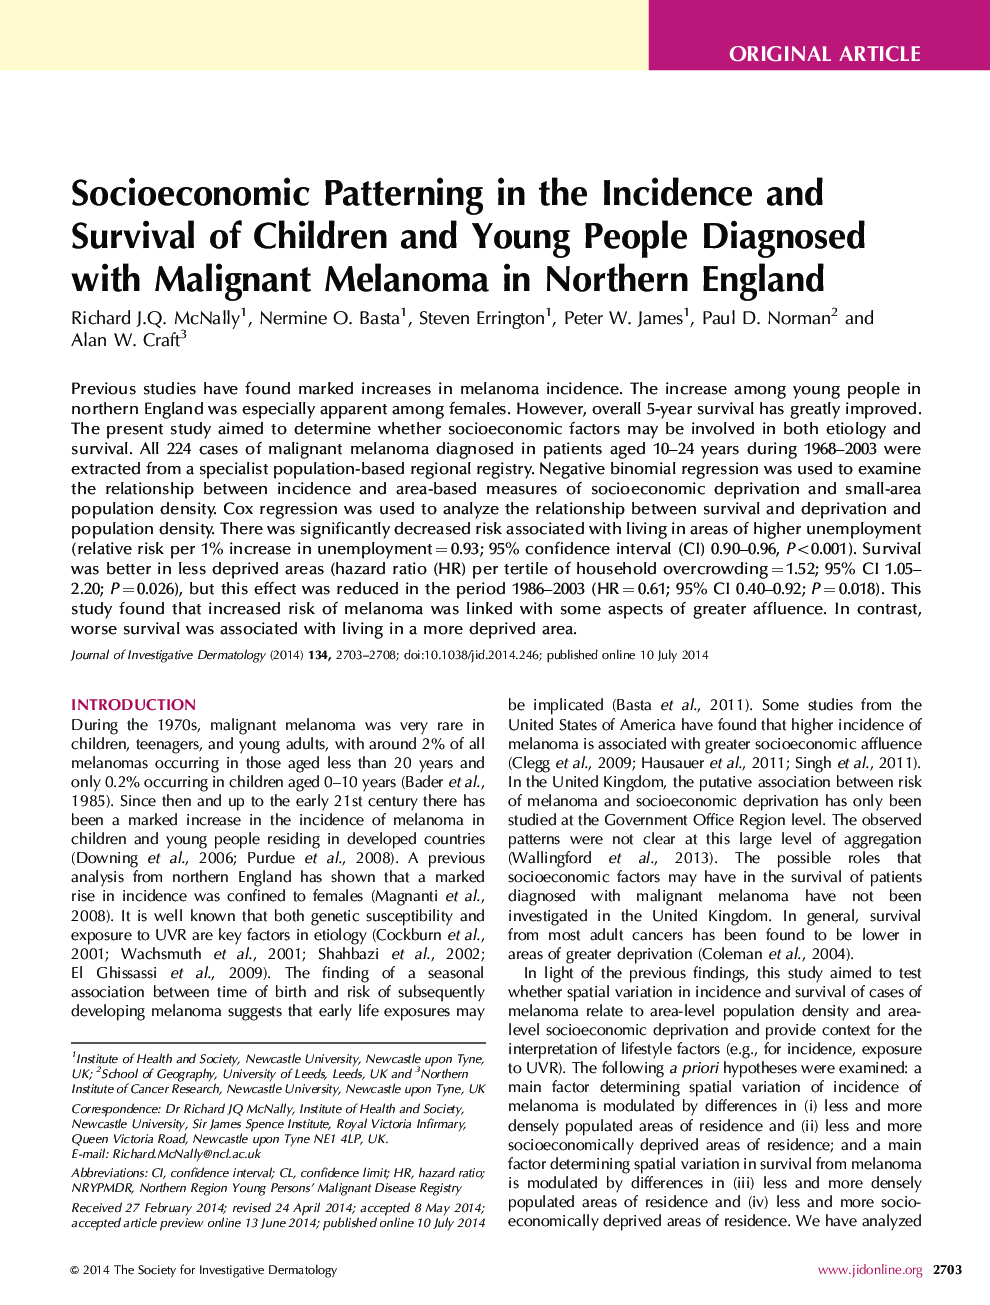 Socioeconomic Patterning in the Incidence and Survival of Children and Young People Diagnosed with Malignant Melanoma in Northern England 